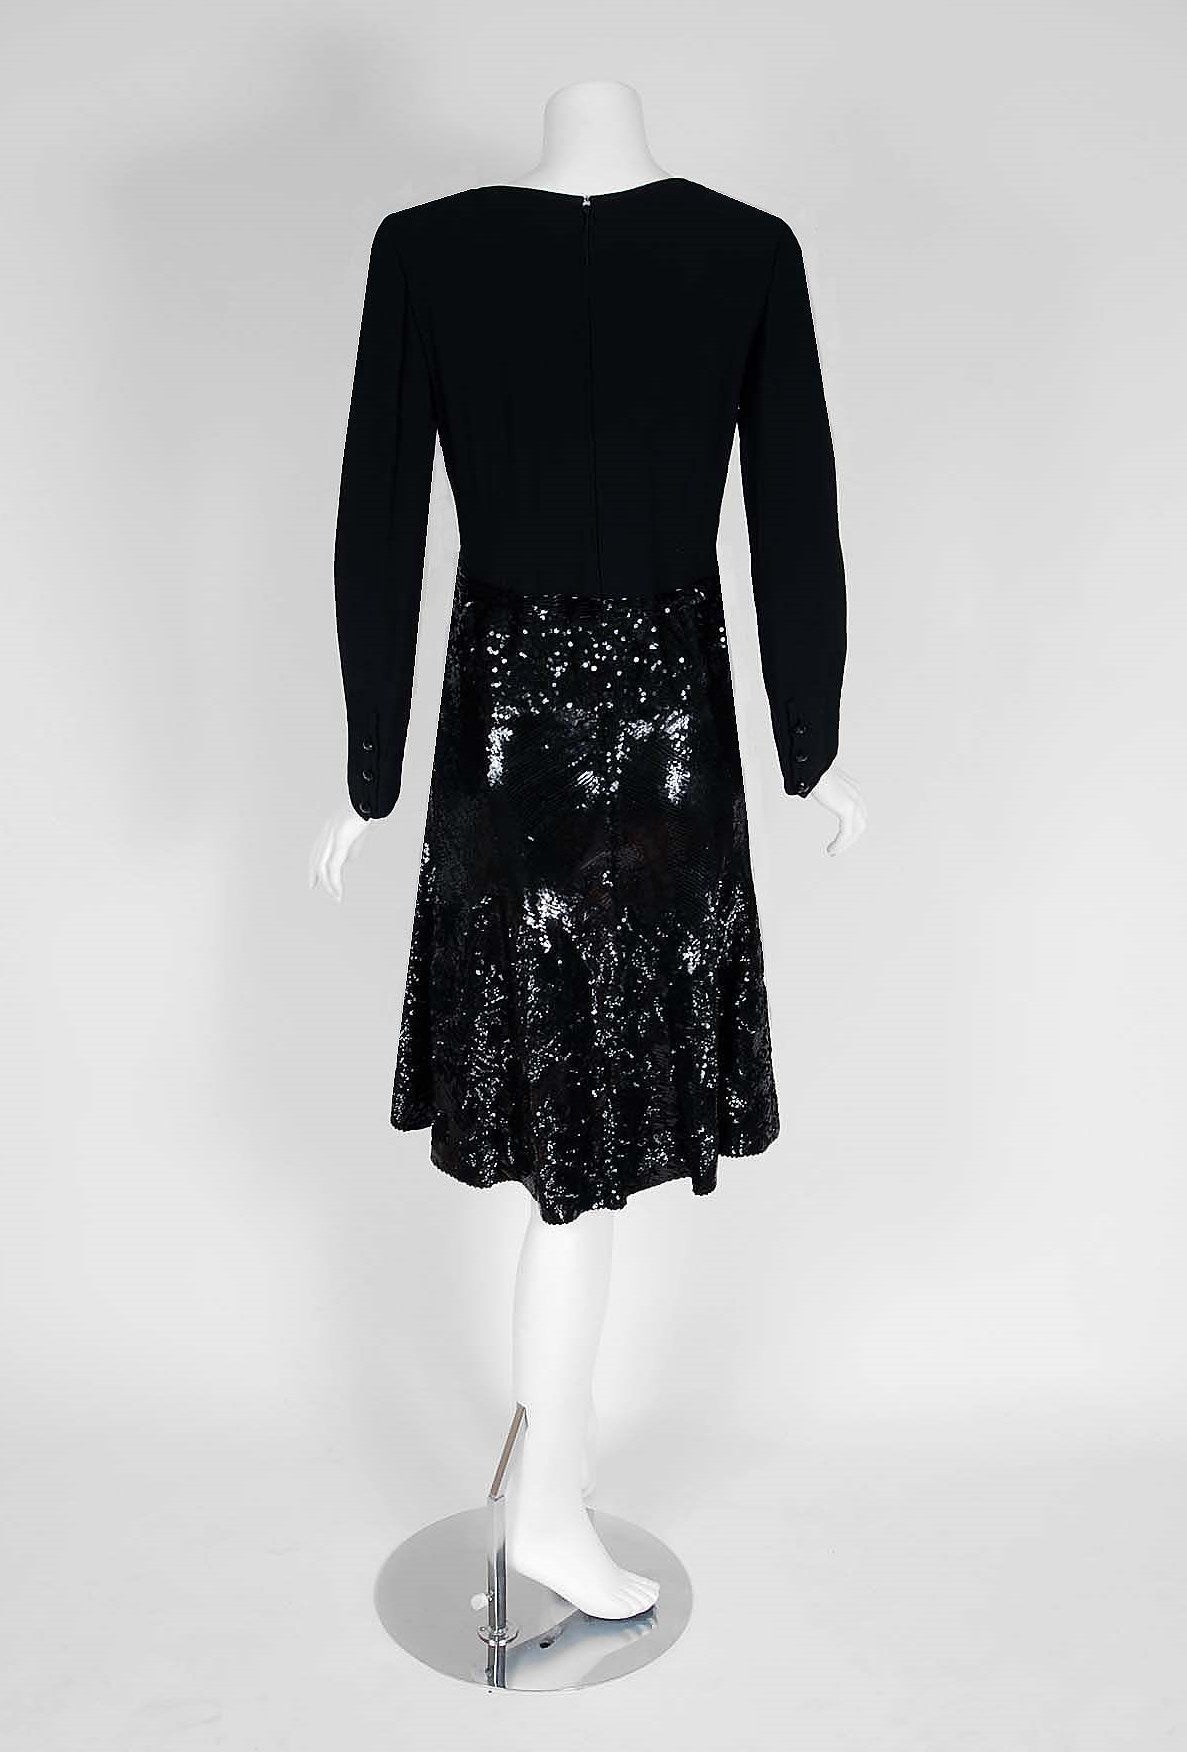 1970's Valentino Haute-Couture Black Sequin Silk Long-Sleeve Plunge Dress 1